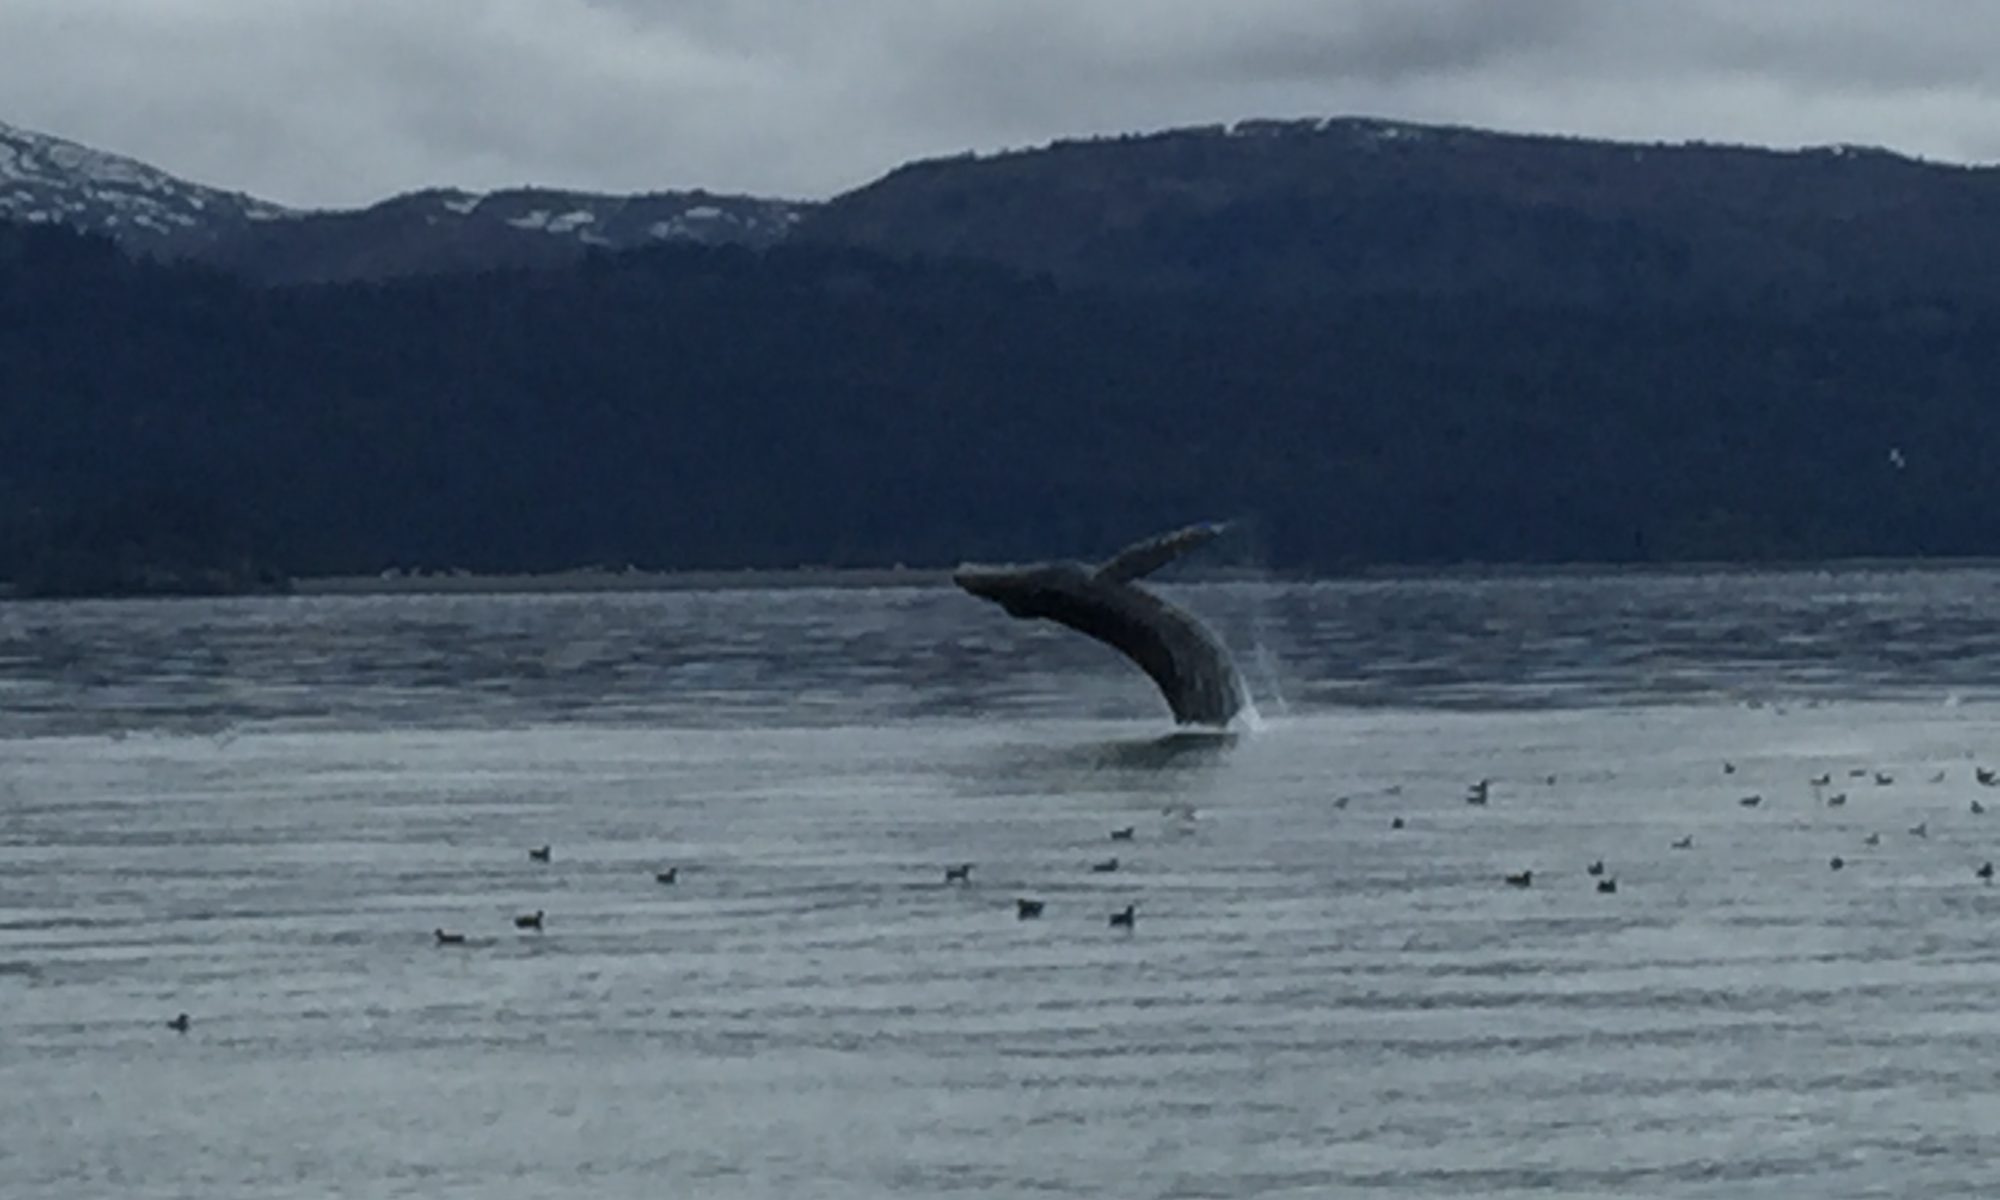 A humpback whale breaching on a cloudy day